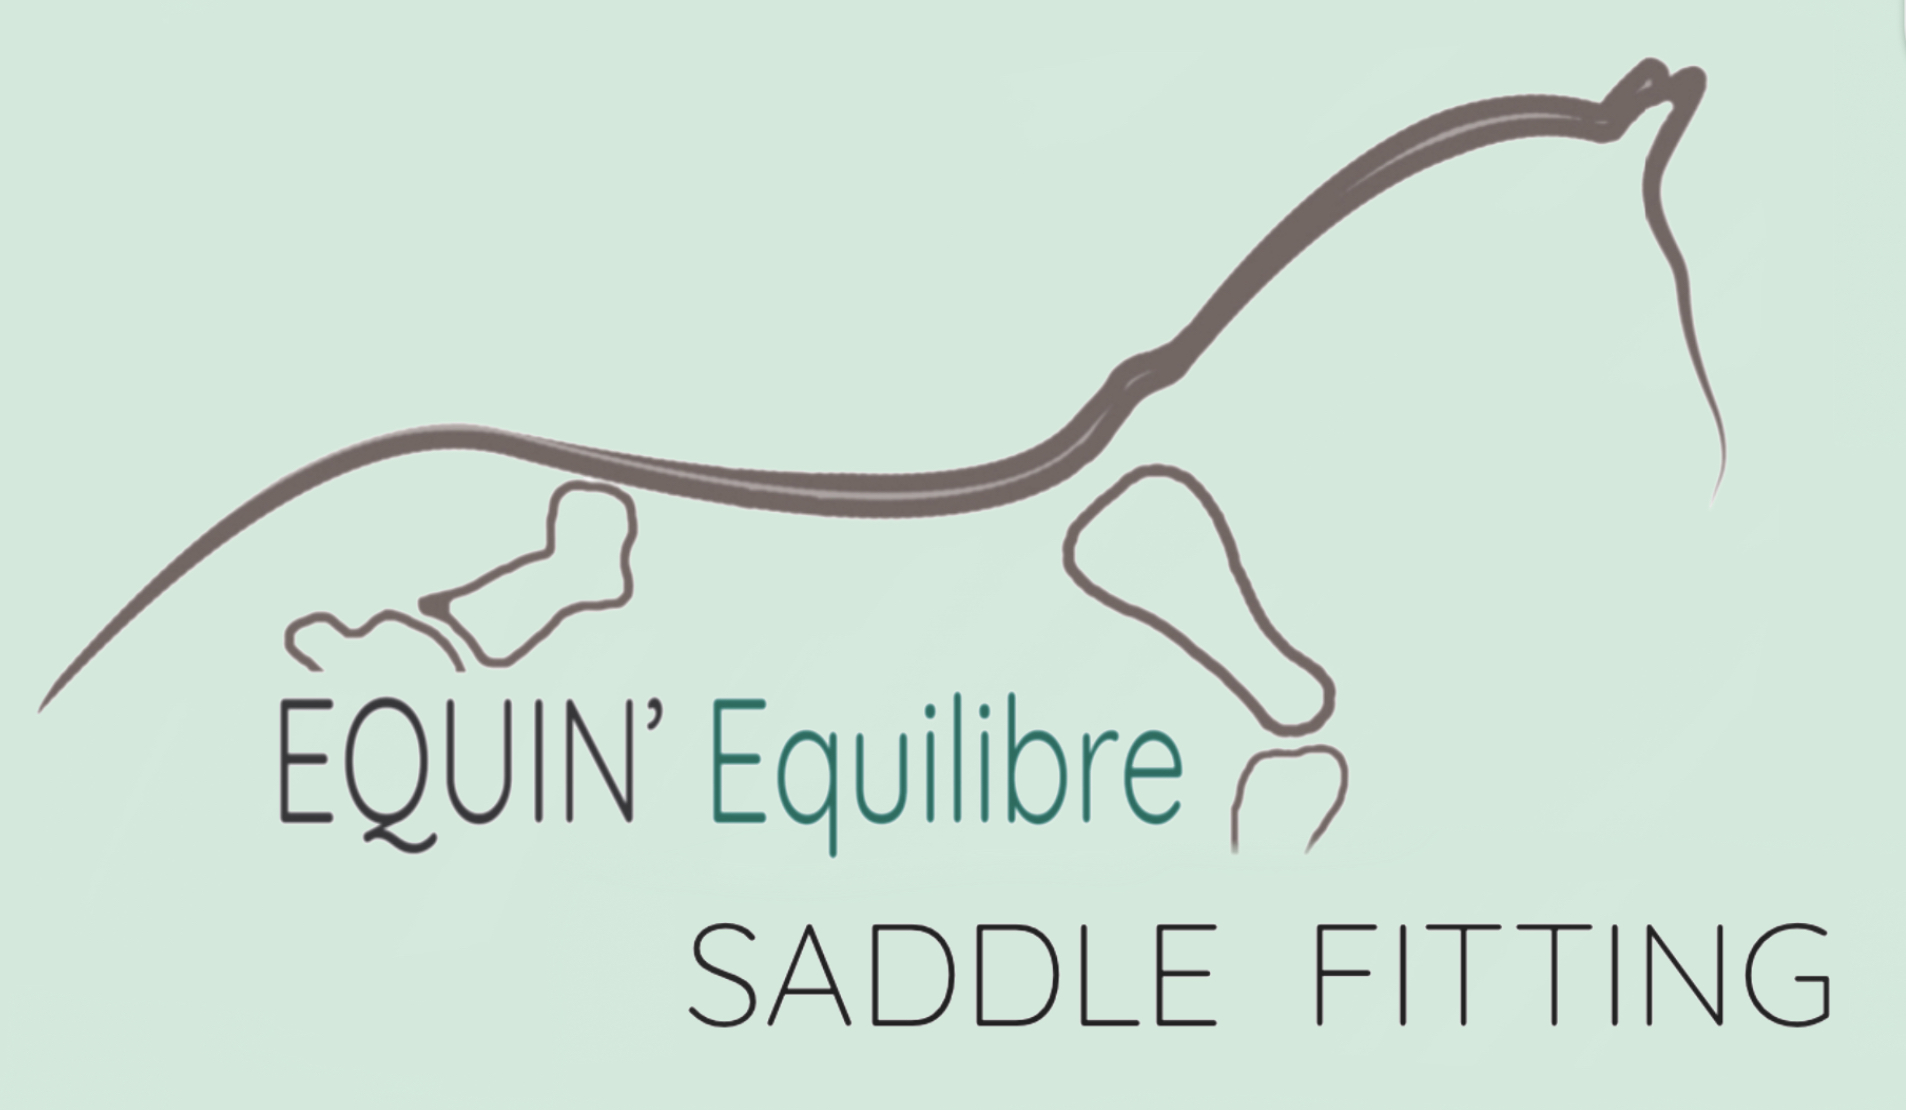 Equin Equilibre Saddle Fitting